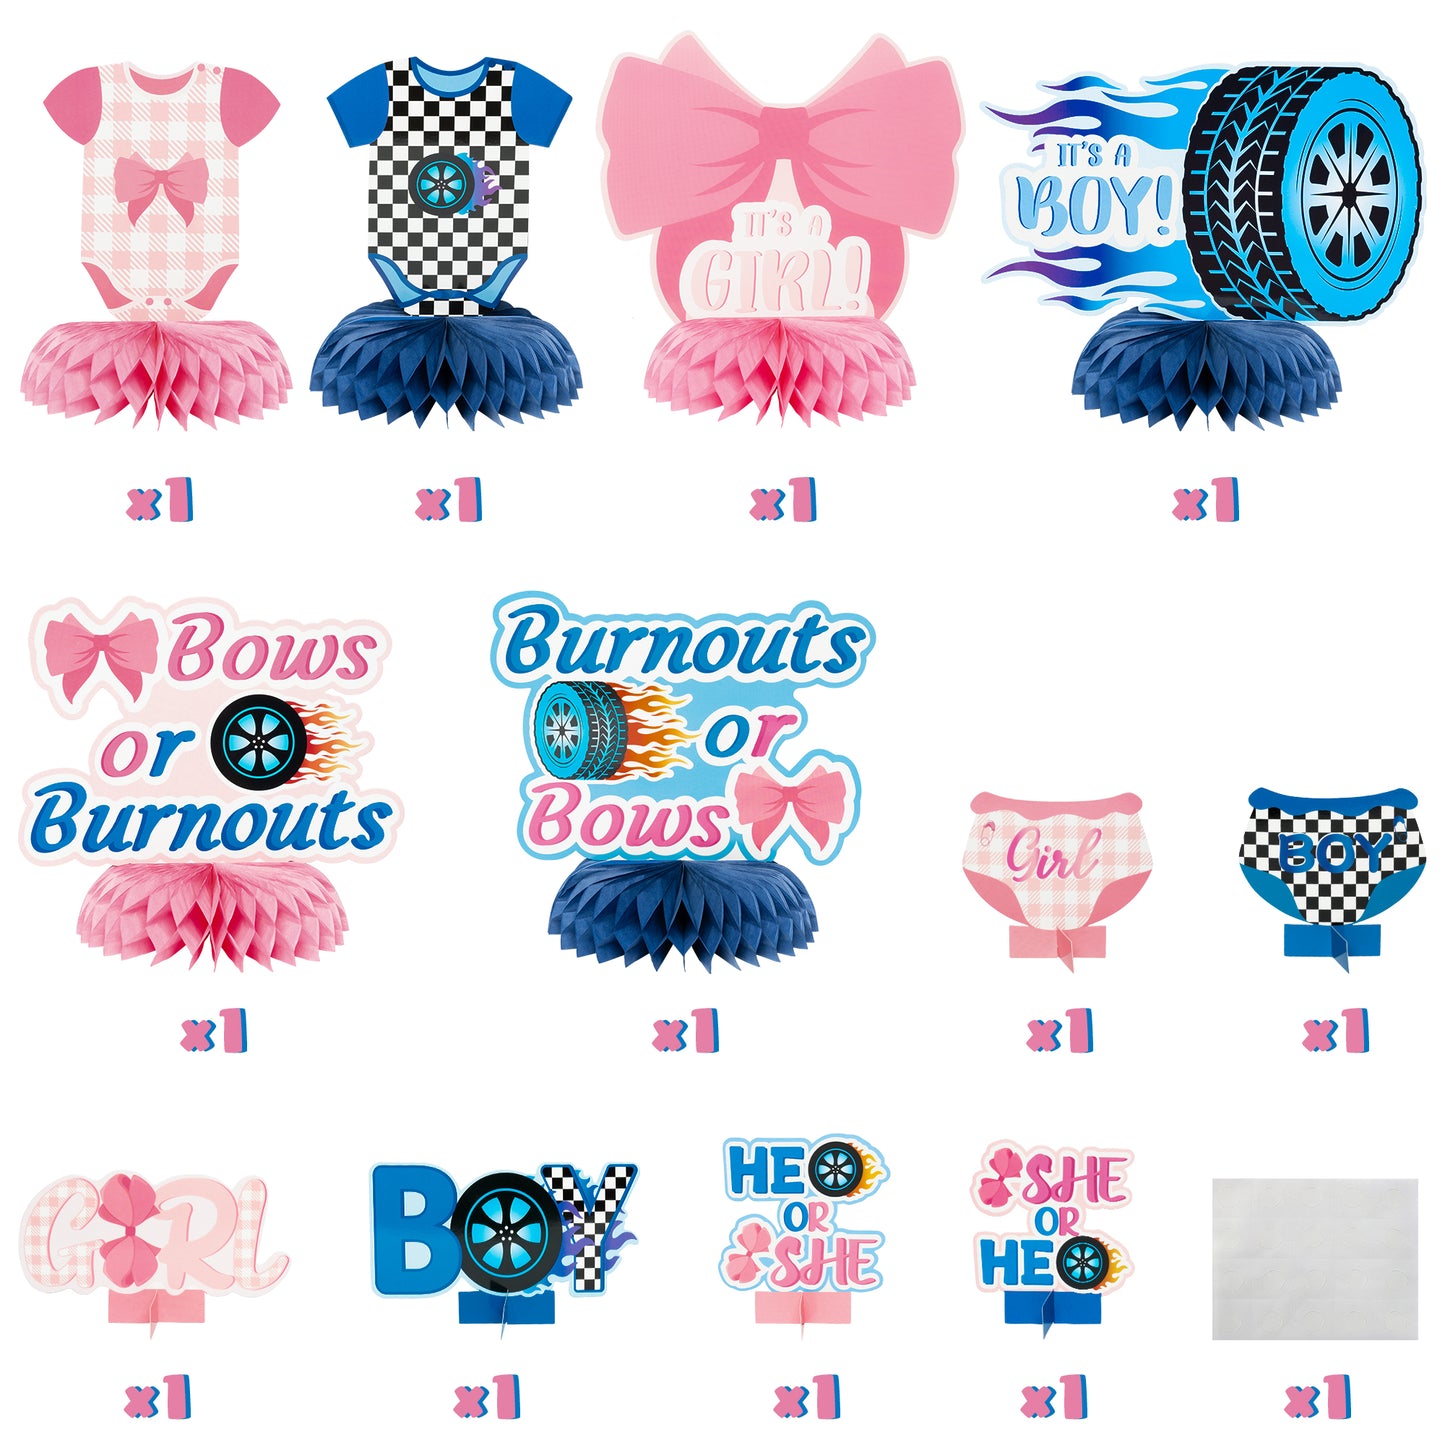 G1ngtar 12Pcs Burnouts or Bows Gender Reveal Party Honeycomb Centerpieces Table Toppers for Boys Girls Blue and Pink Car Wheel Bow Tie Party Decoration Supplies for He or She Gender Reveal Baby Shower